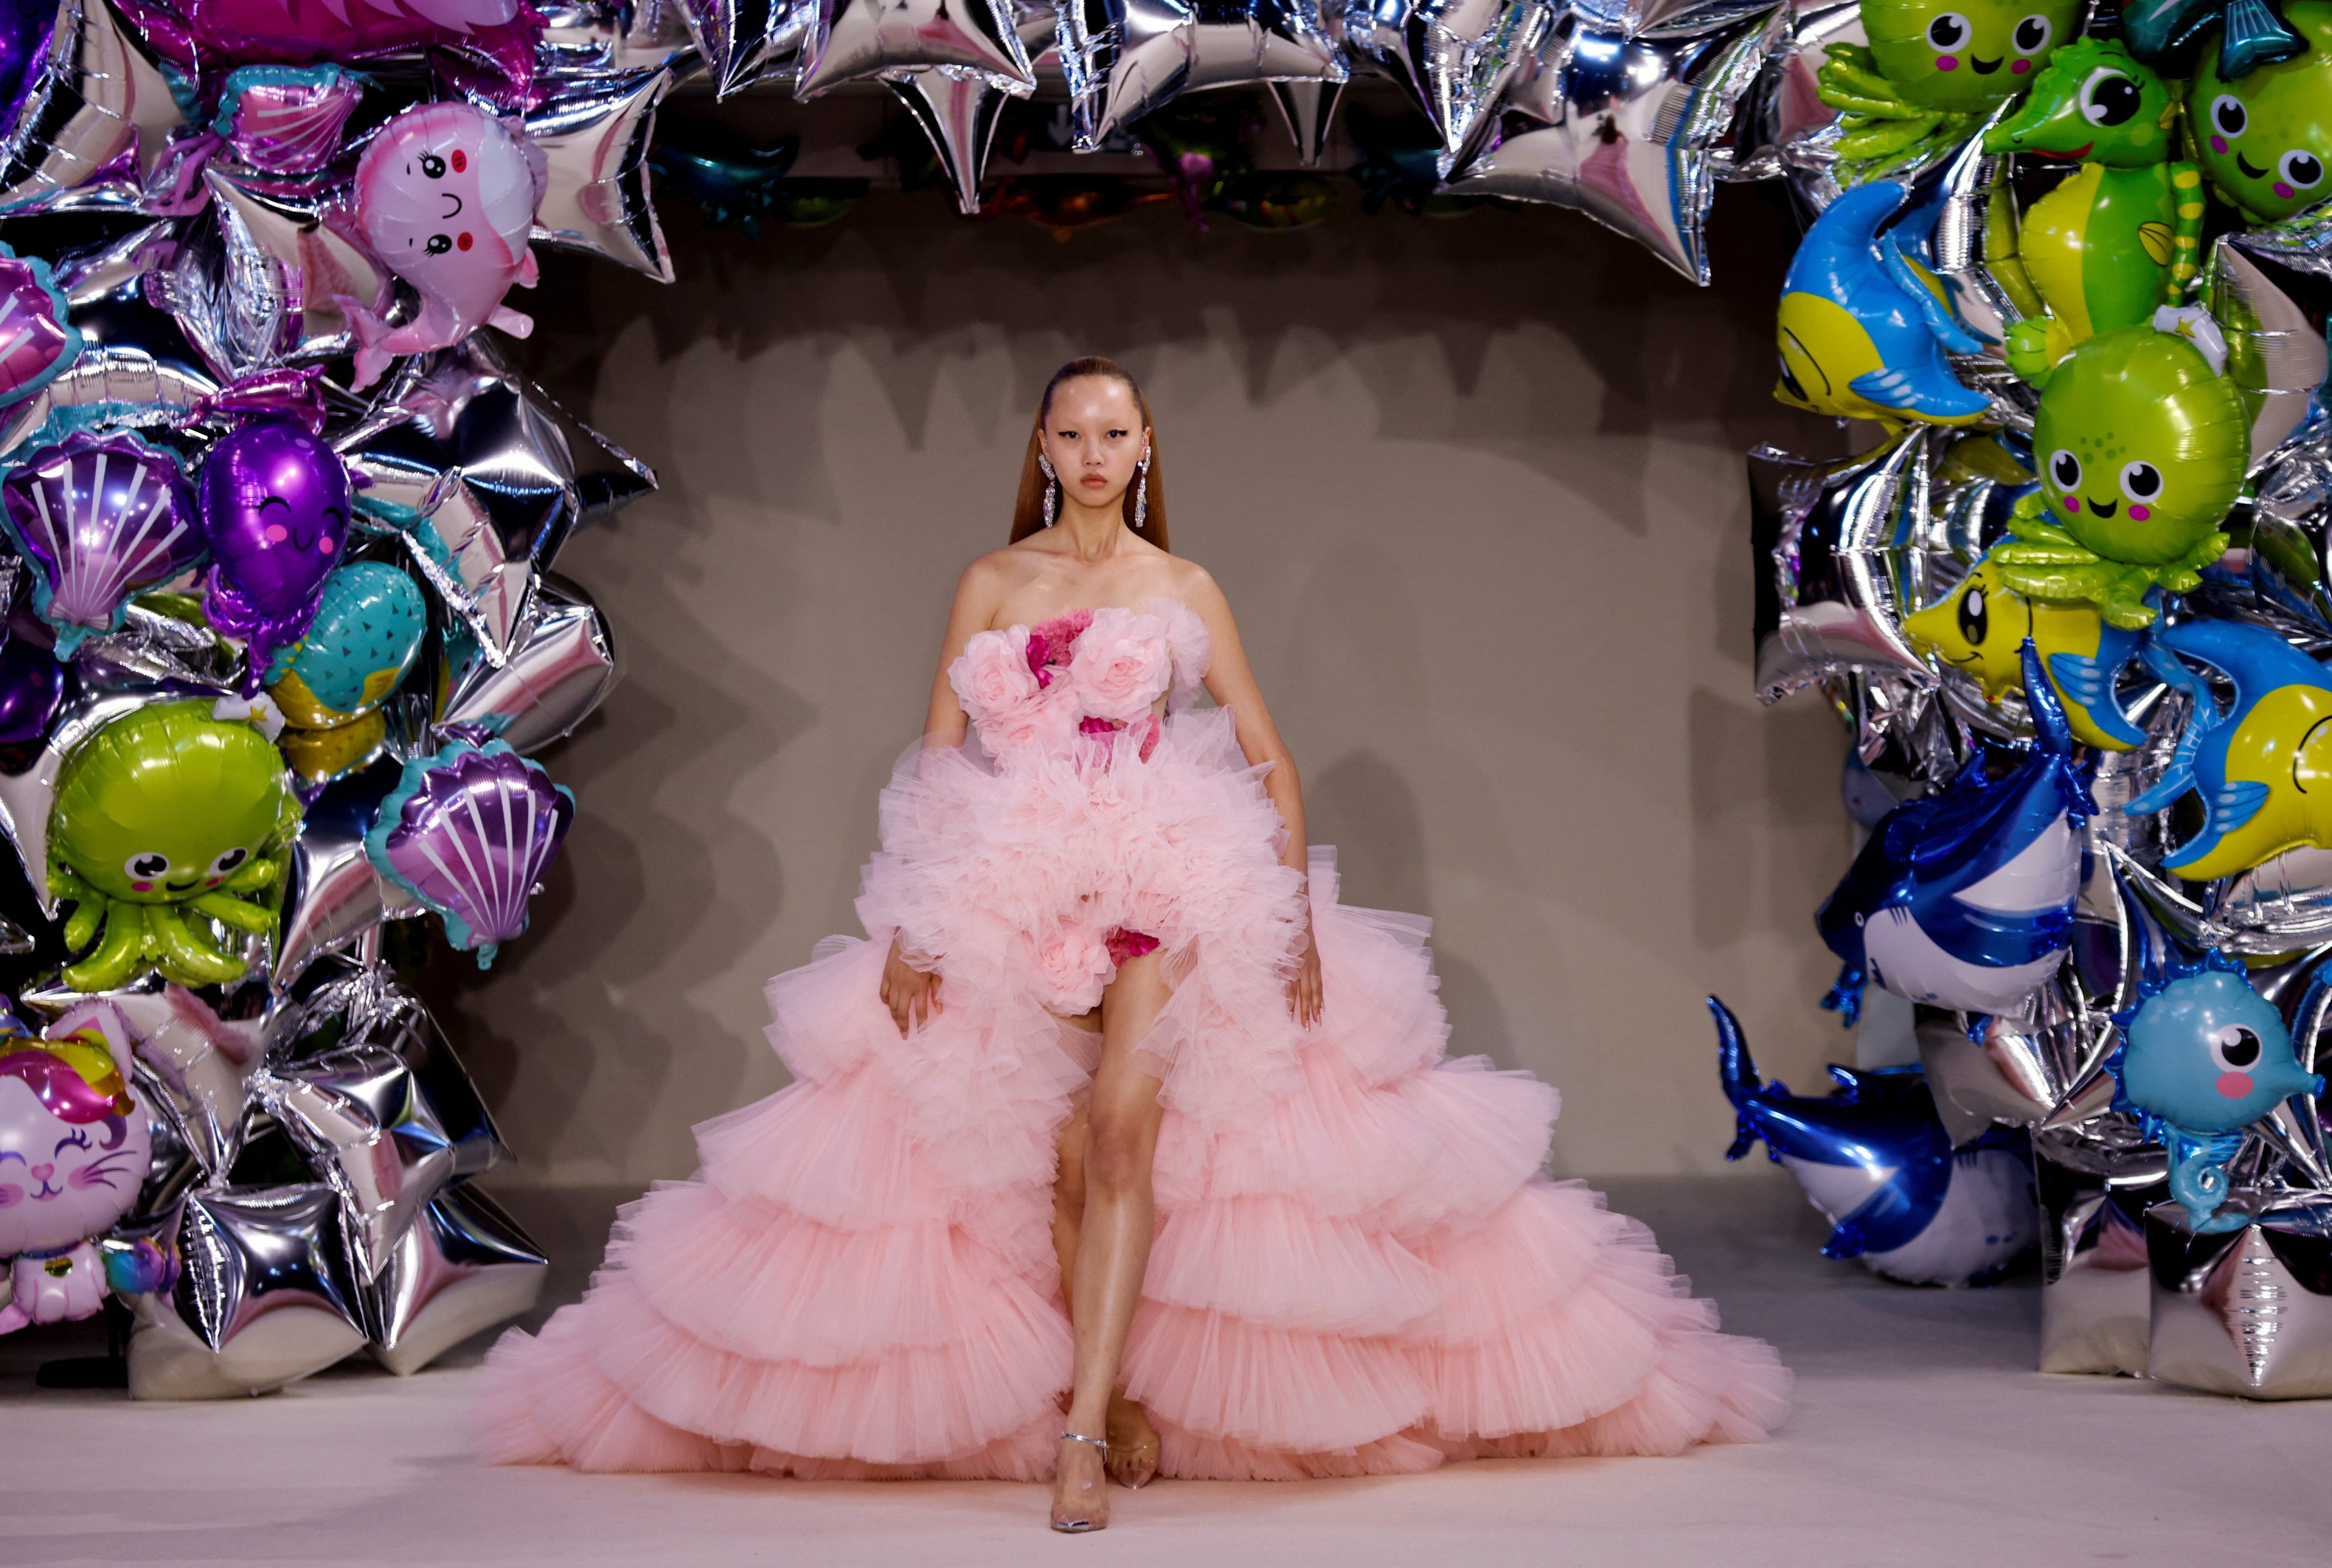 A model presents a creation by designer Giambattista Valli as part of his haute couture autumn/winter 2022-2023 collection show and to celebrate his 10th year anniversary in haute couture, in Paris, France, on July 4. Photo: Reuters